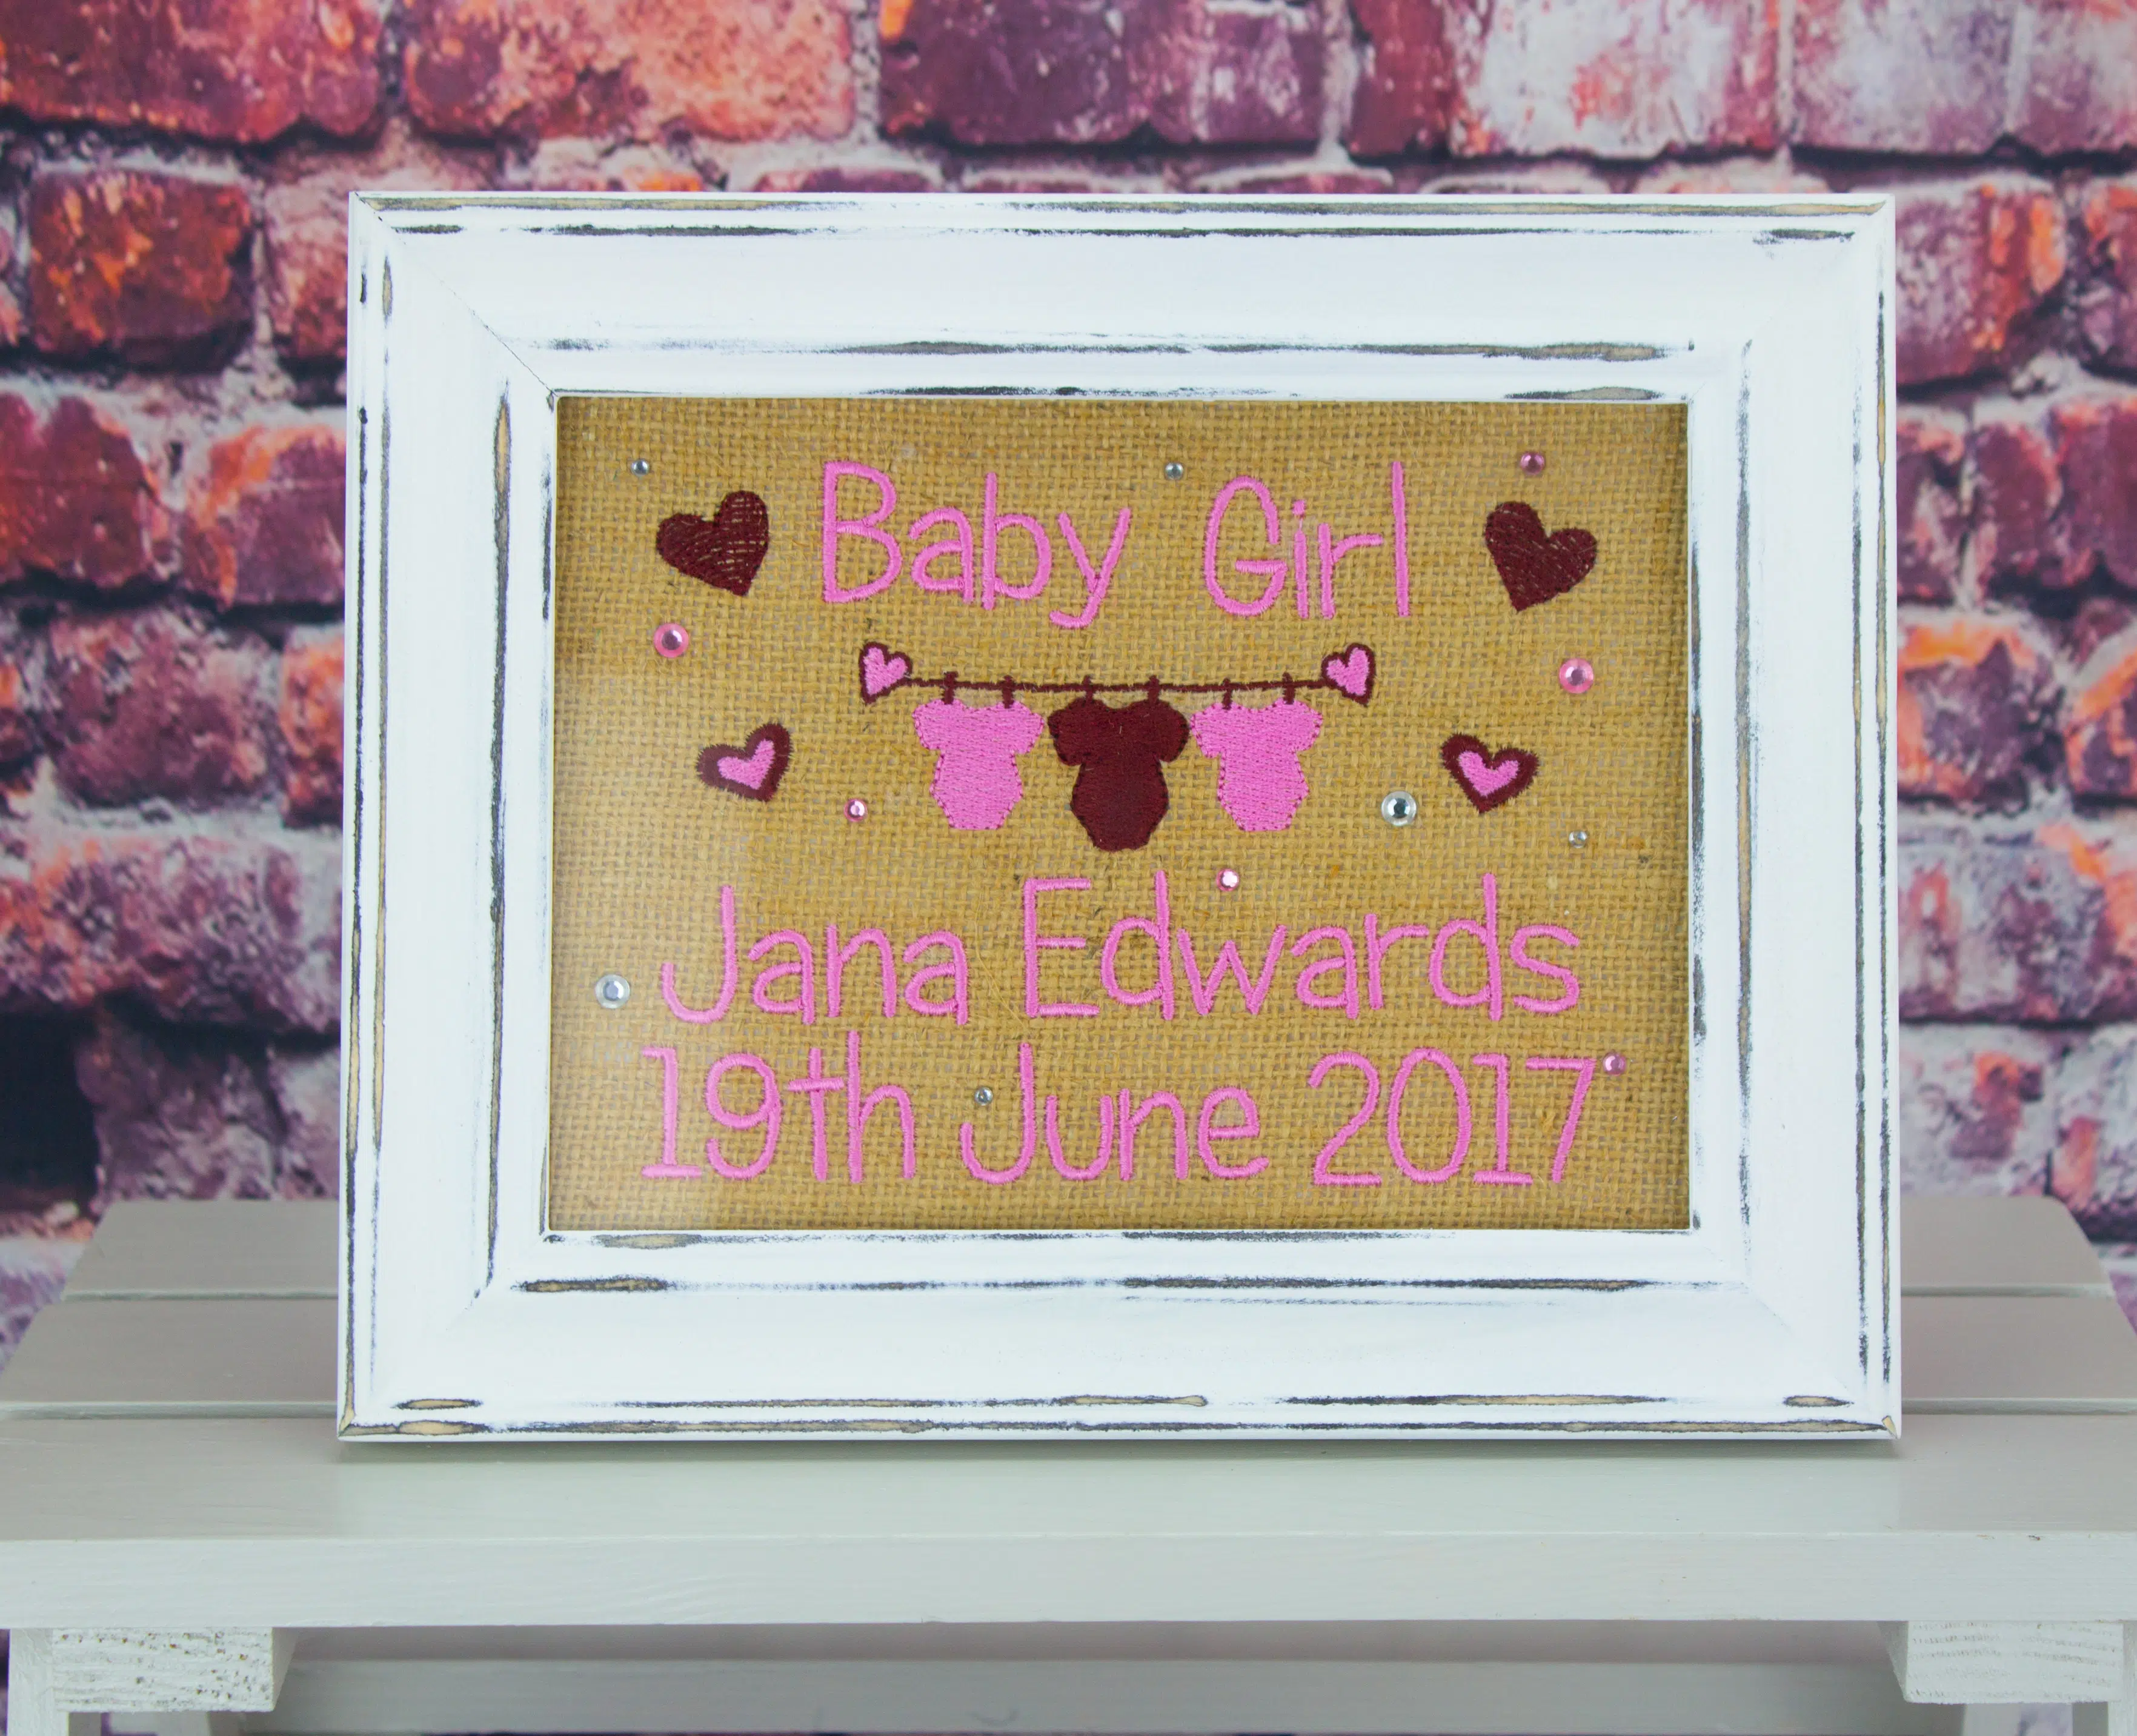 Personalised Hessian Frame - pink